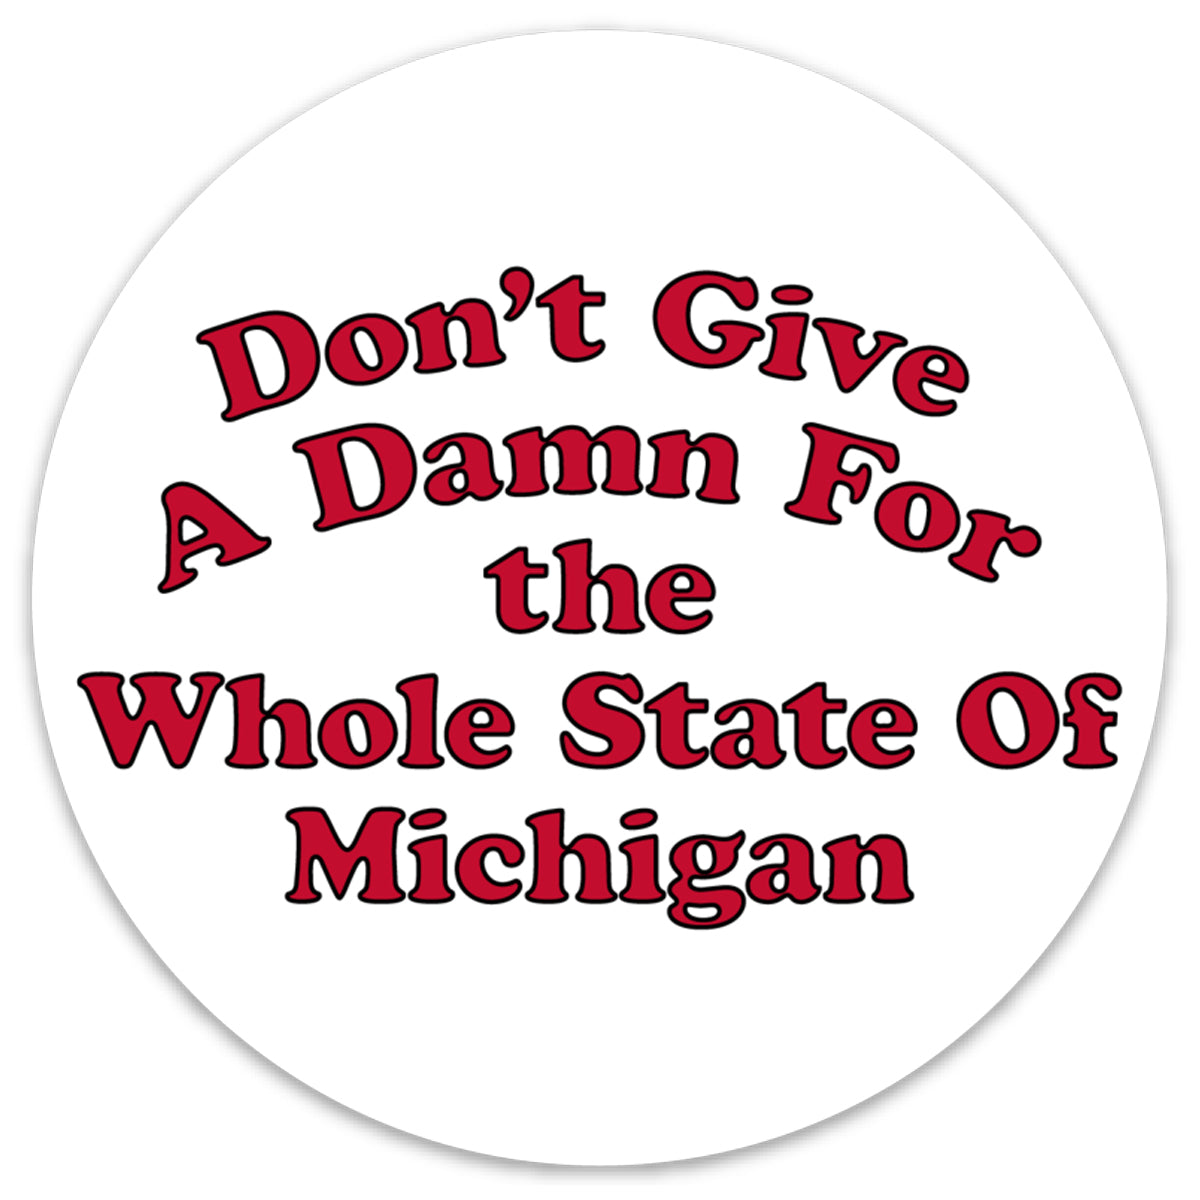 Don't Give a Damn for the Whole State of Michigan Sticker